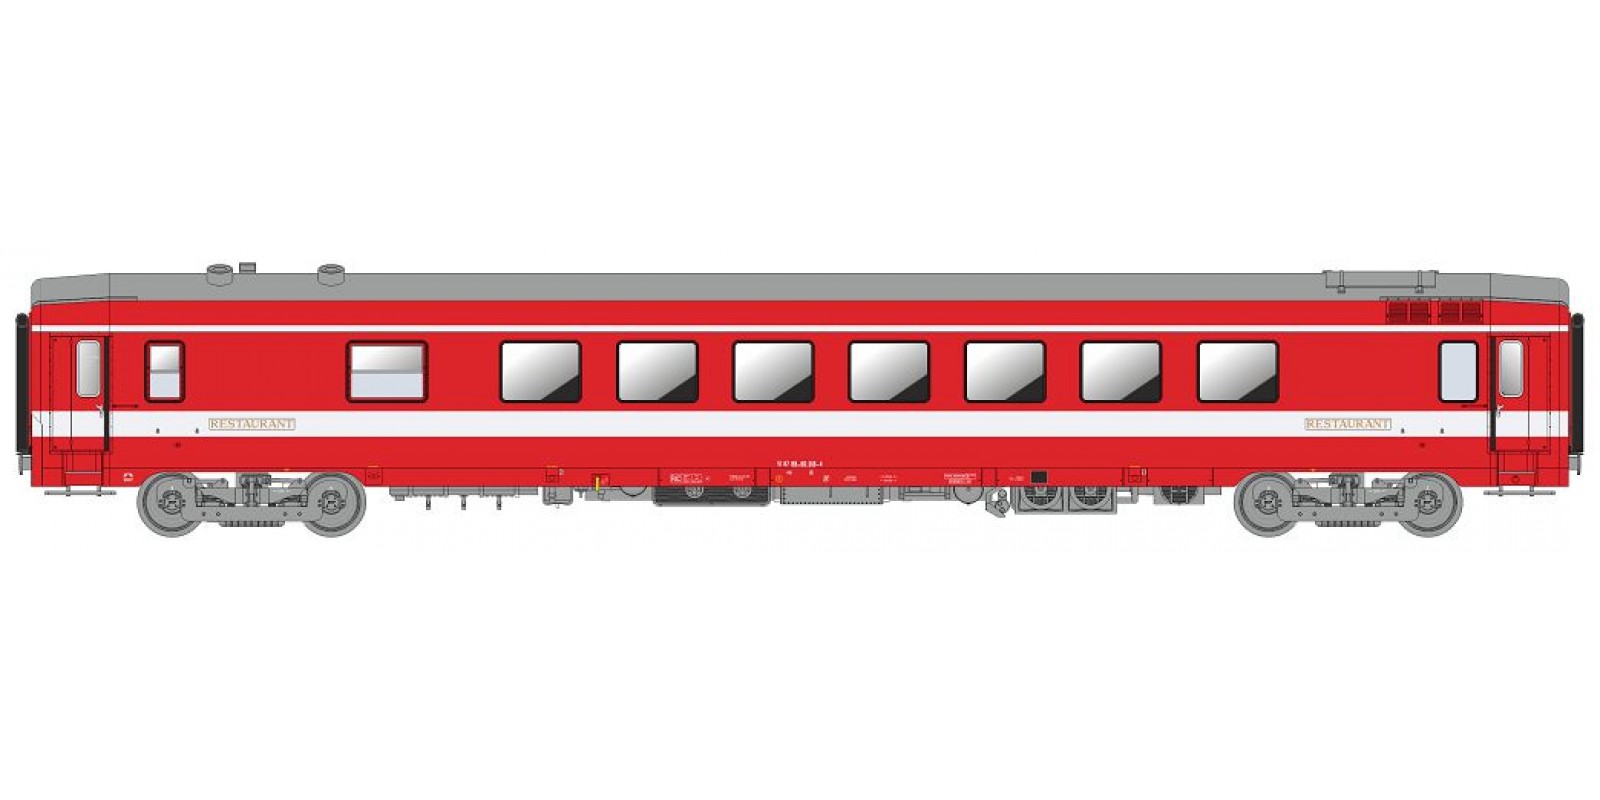 REVB208 Restaurant Car VRU LE CAPITOLE N°18 - Capitole livery EP-IV